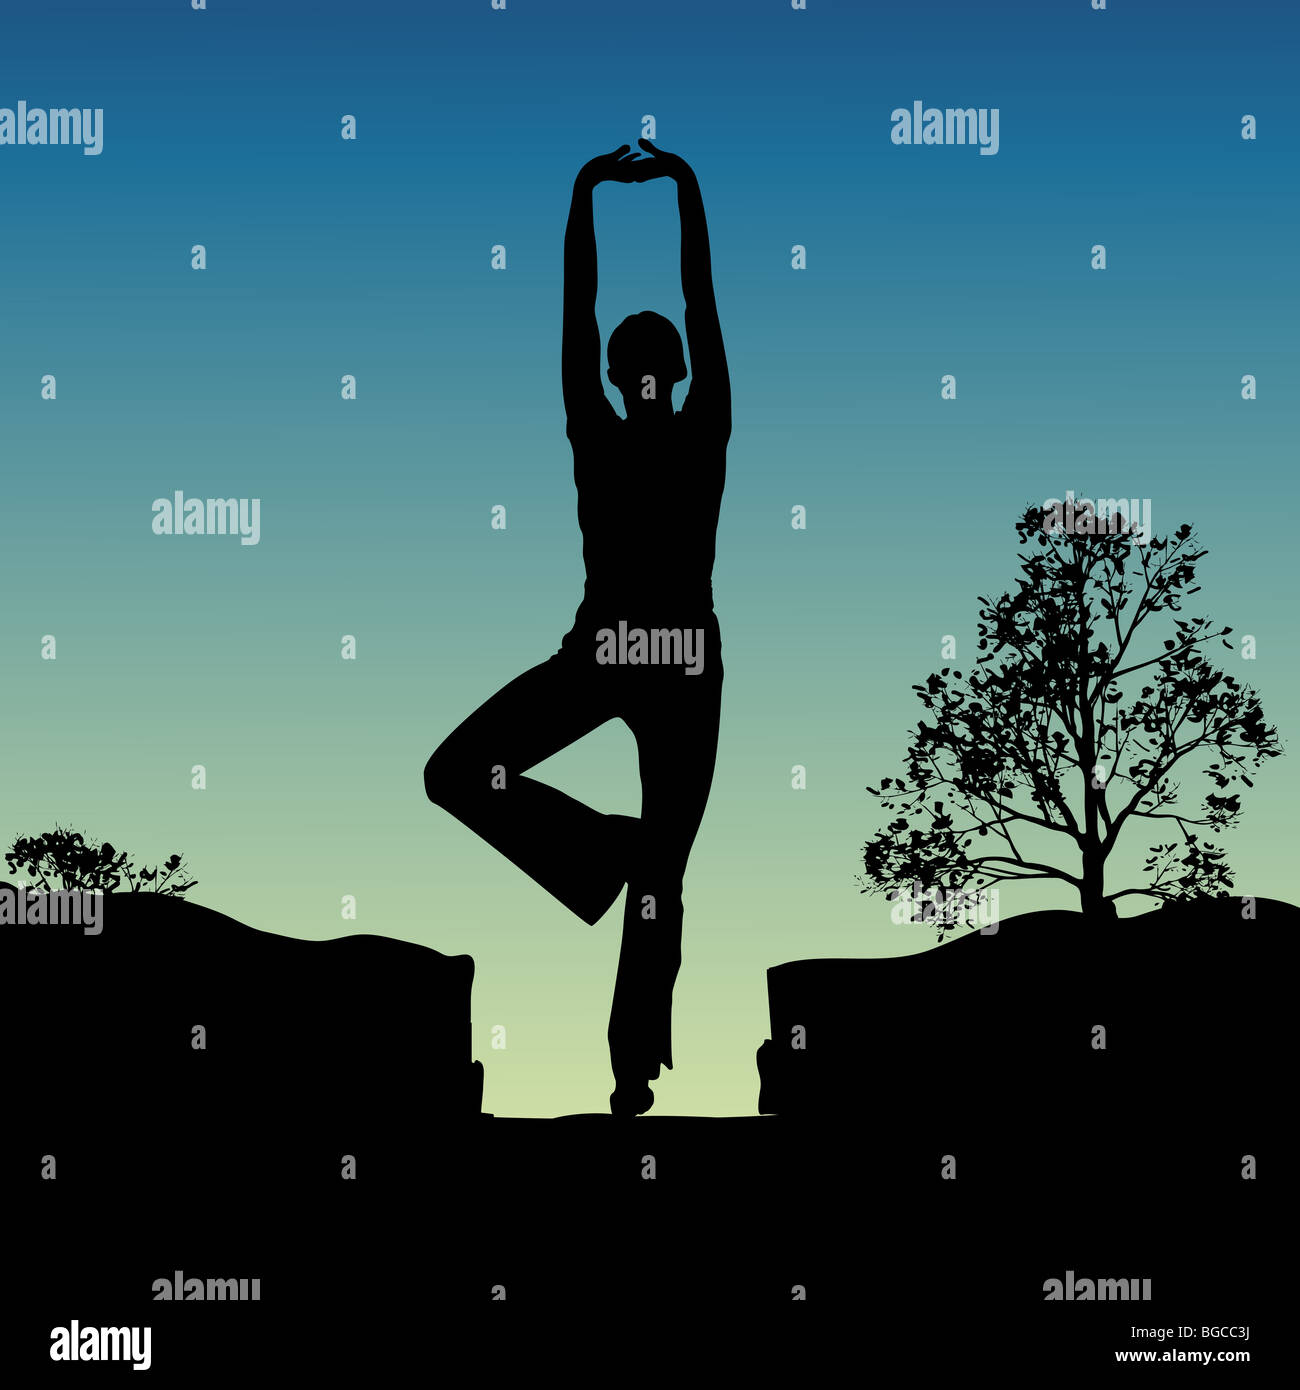 silhouette view of human doing yoga, standing position Stock Photo